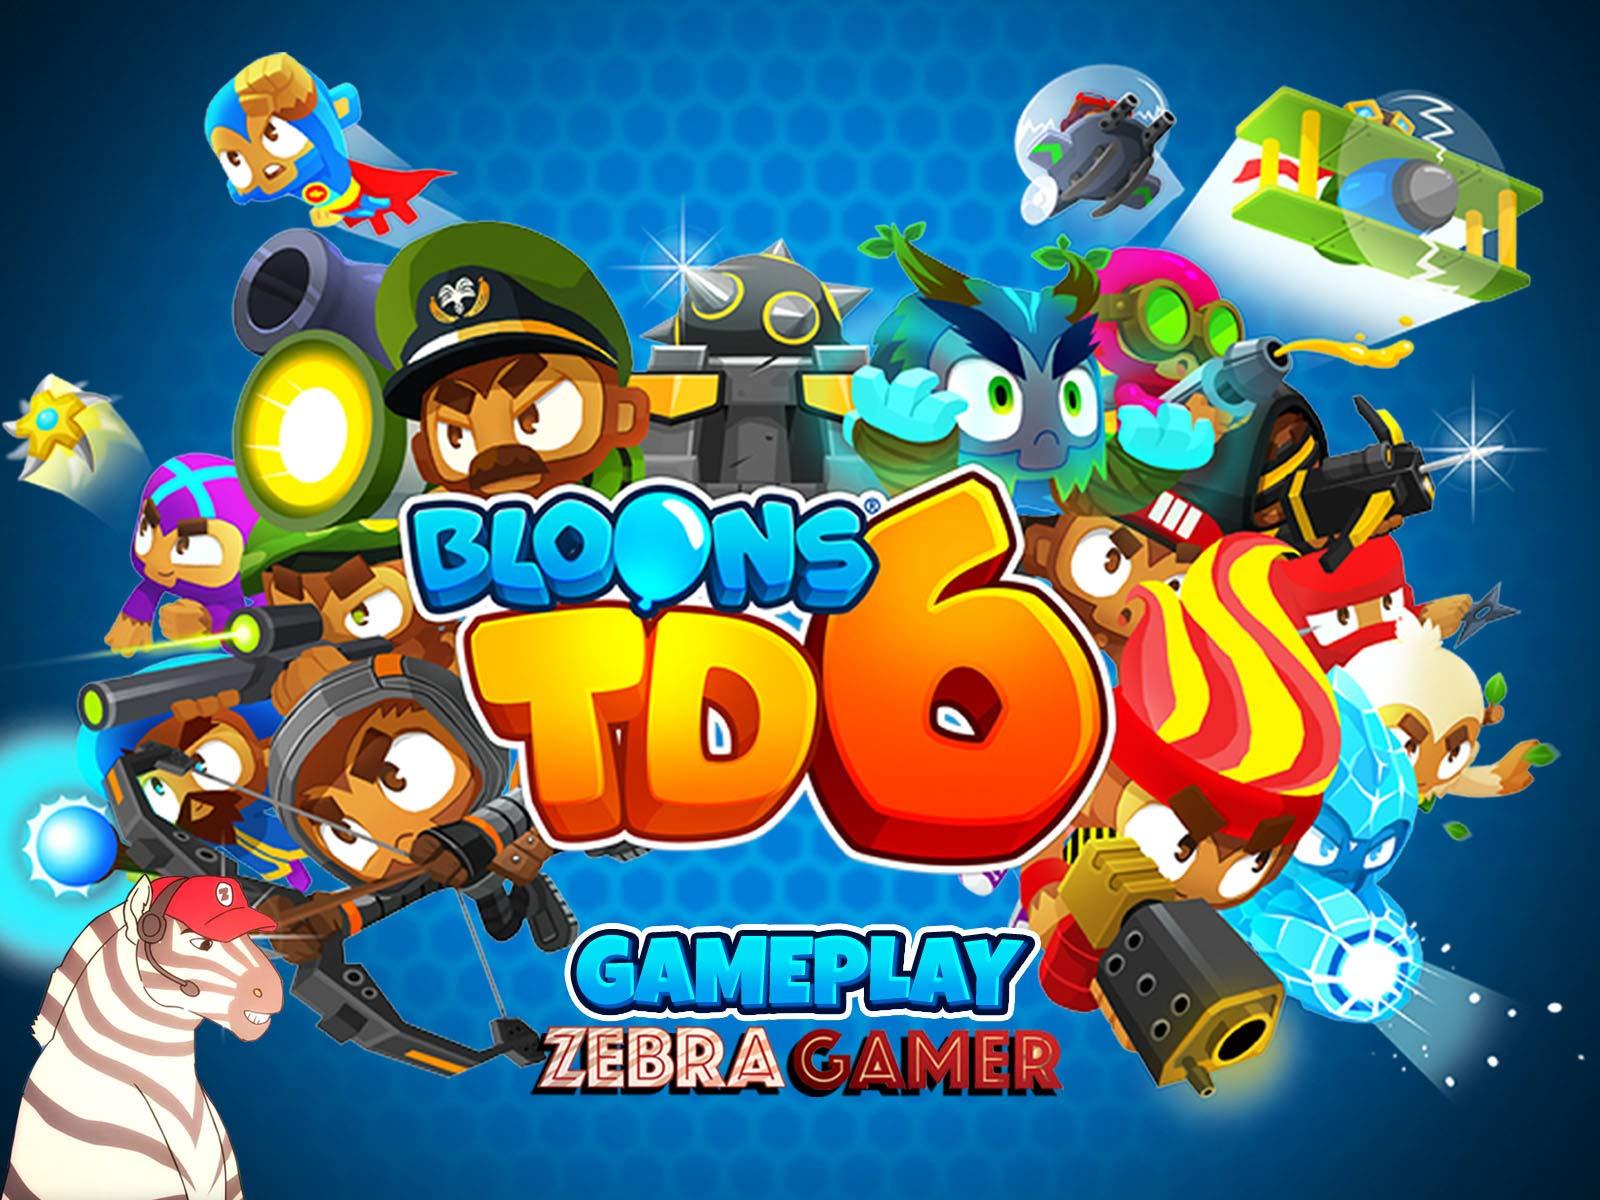 bloons td 6 cheat engine pc